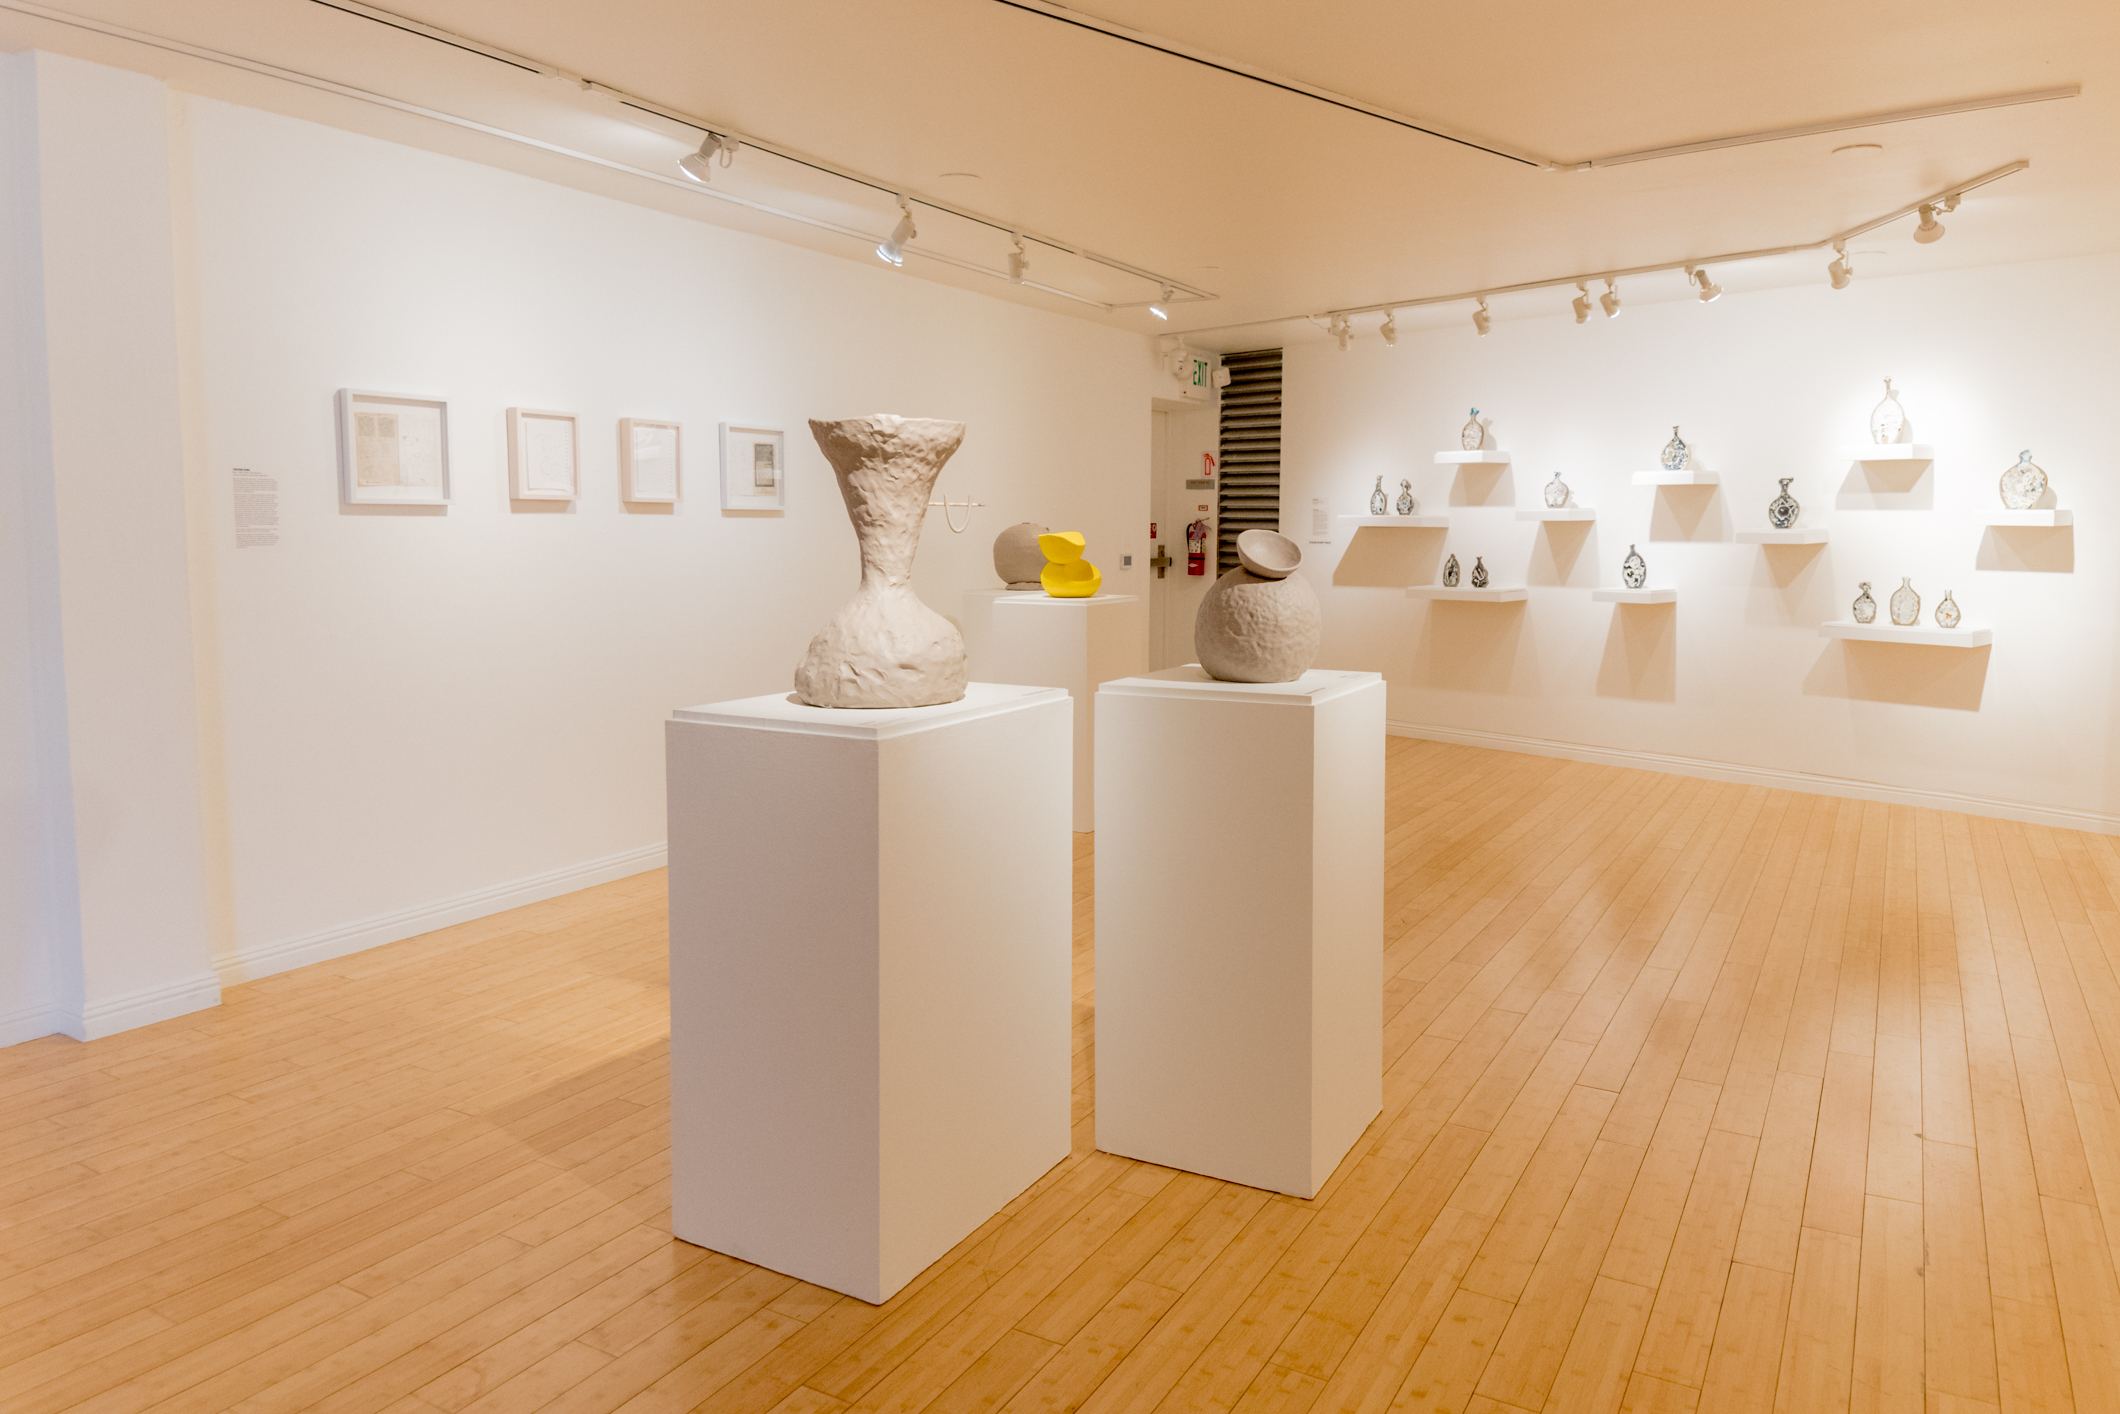 Melting Point: Movements in Contemporary Clay, installation view, 2018.